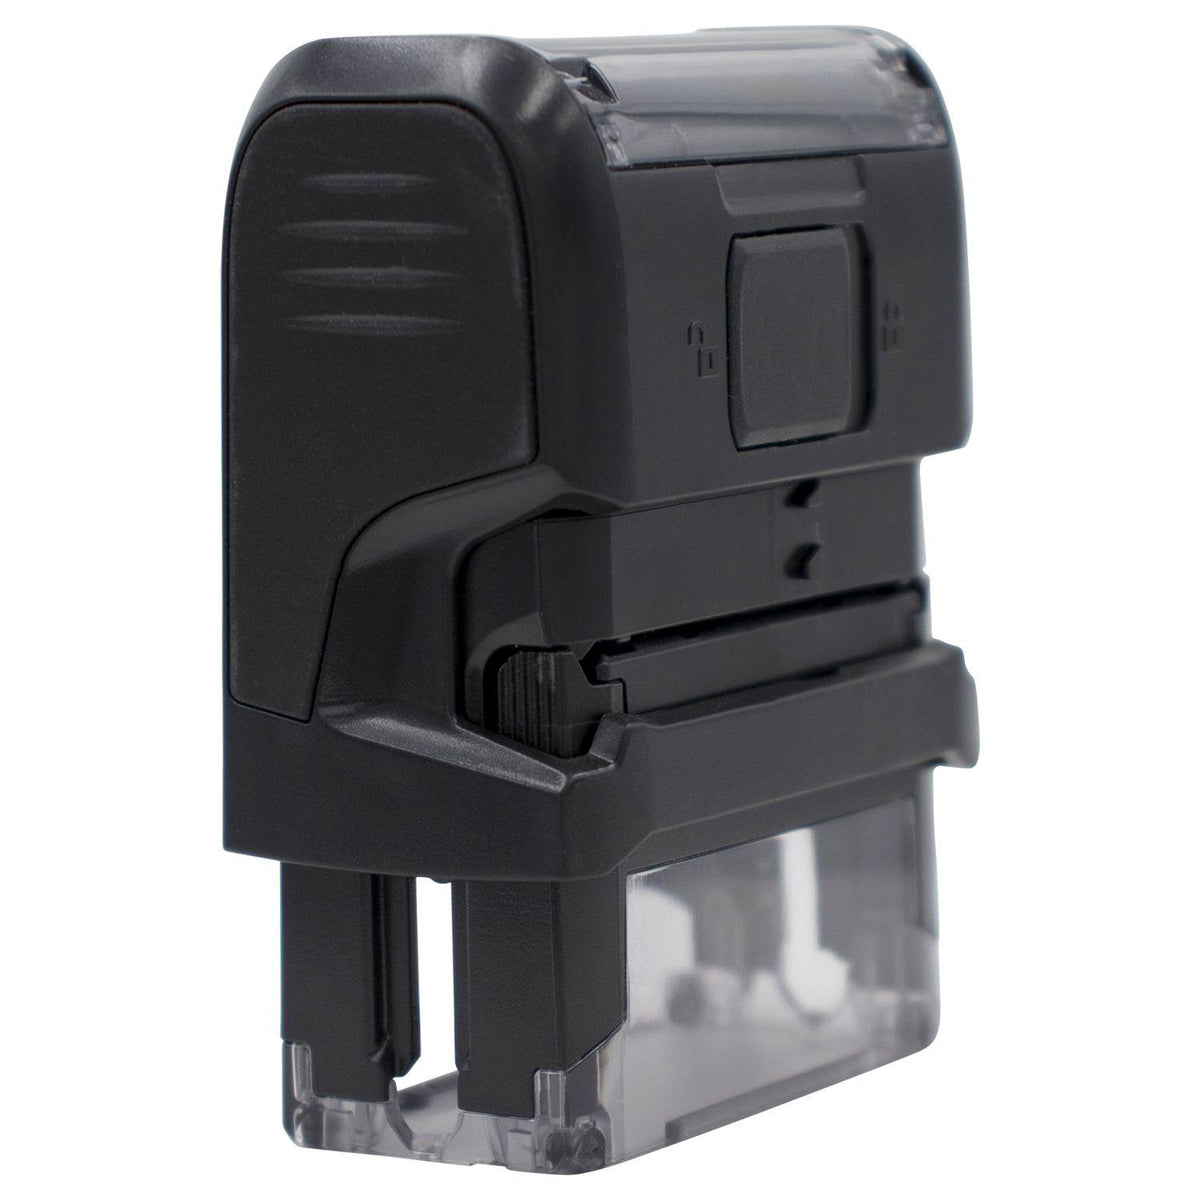 Large Self Inking Faxed Stamp - Engineer Seal Stamps - Brand_Trodat, Impression Size_Large, Stamp Type_Self-Inking Stamp, Type of Use_Office, Type of Use_Professional